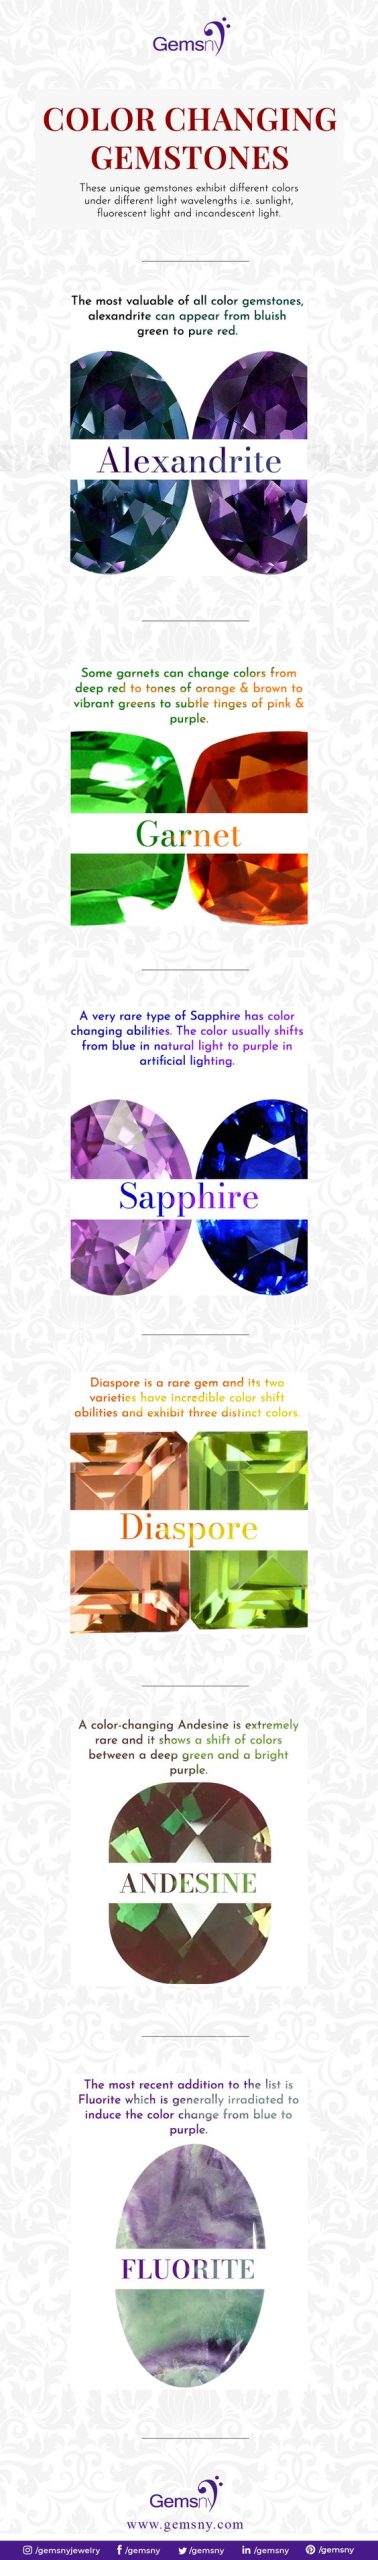 6 Color Changing Gemstones You Should Know